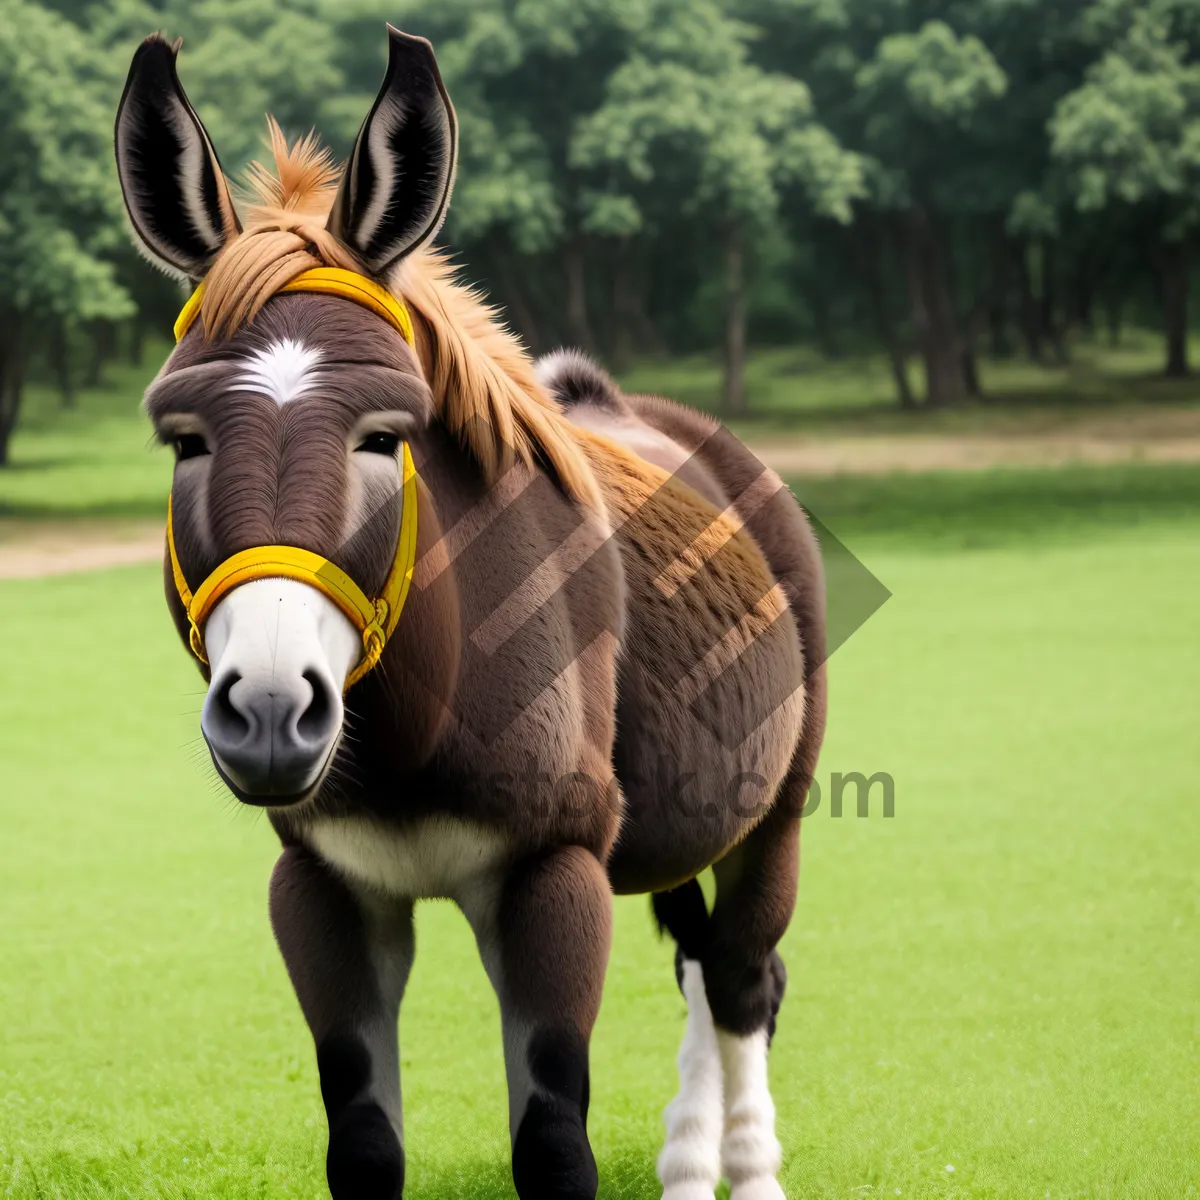 Picture of Graceful Thoroughbred Stallion in Rural Pasture